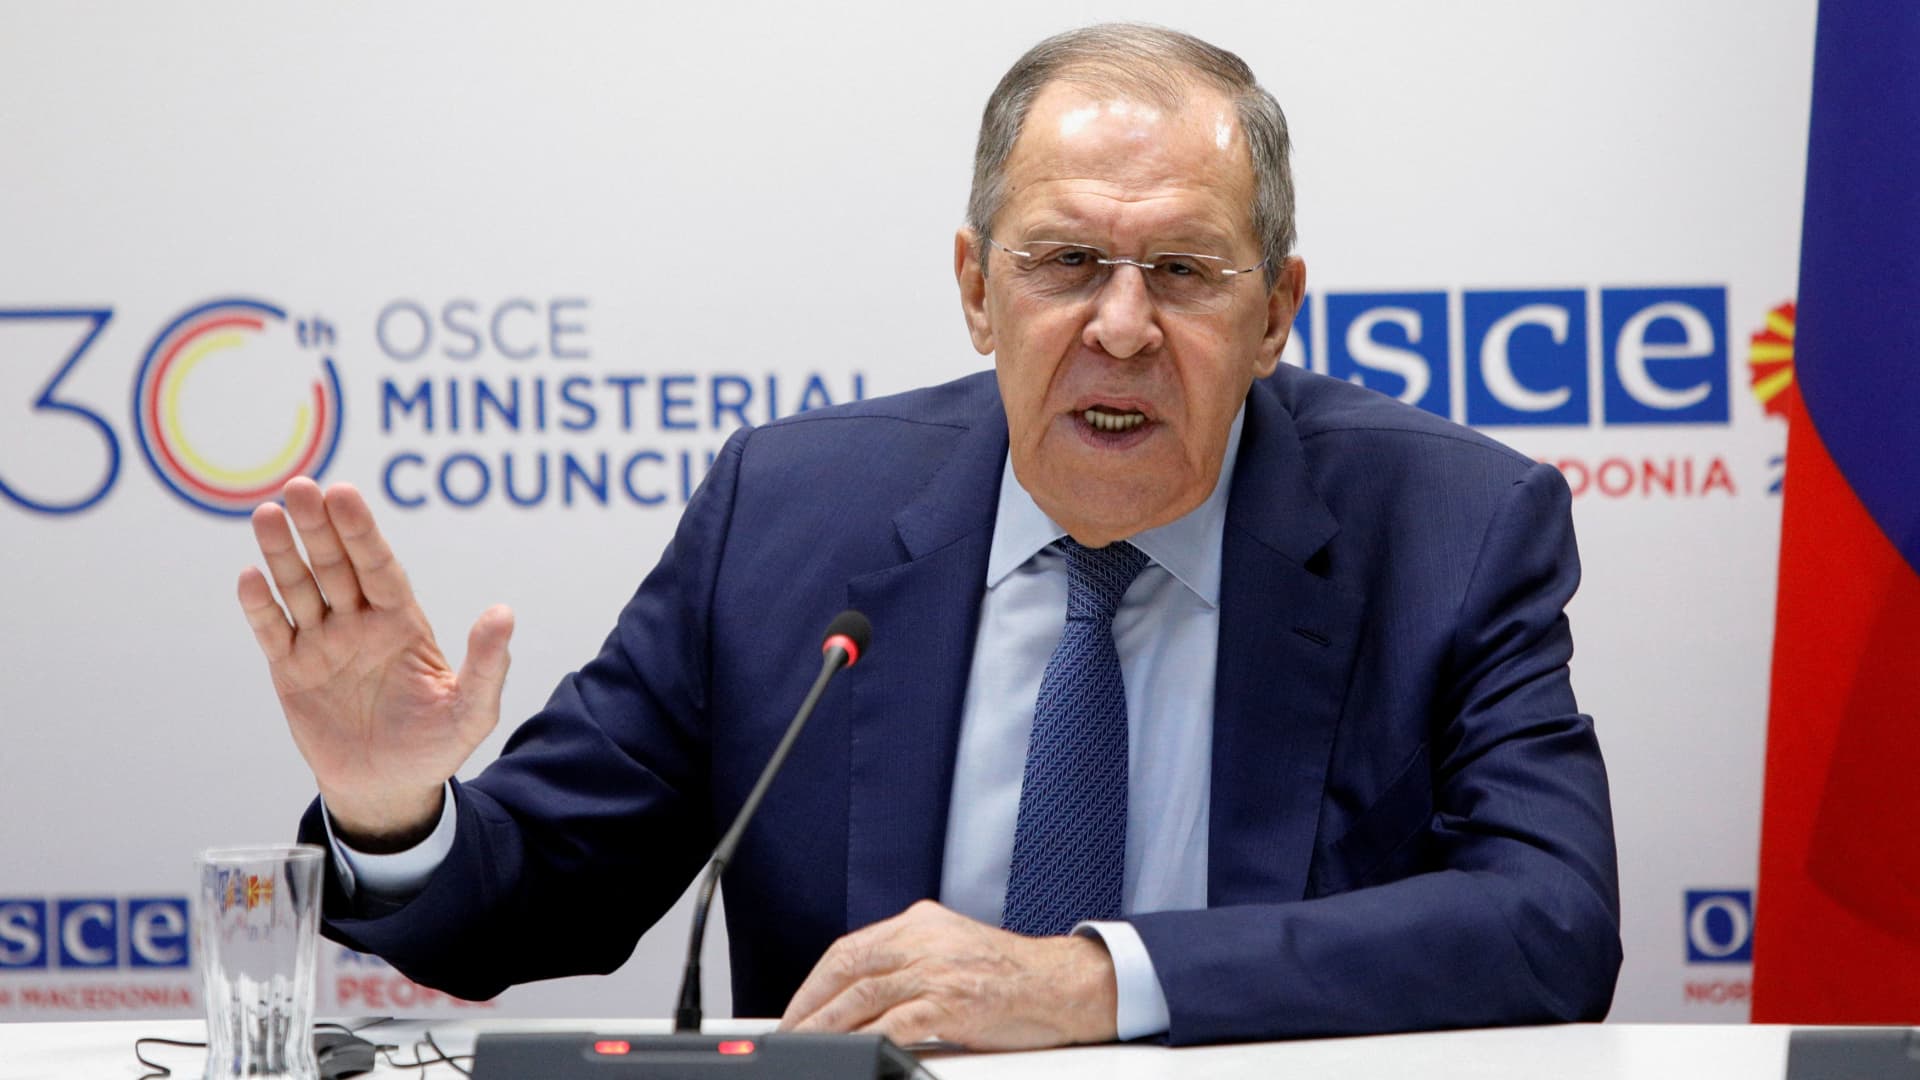 Russia's Lavrov claims Ukraine's Western allies are quietly changing strategy in bid to end conflict